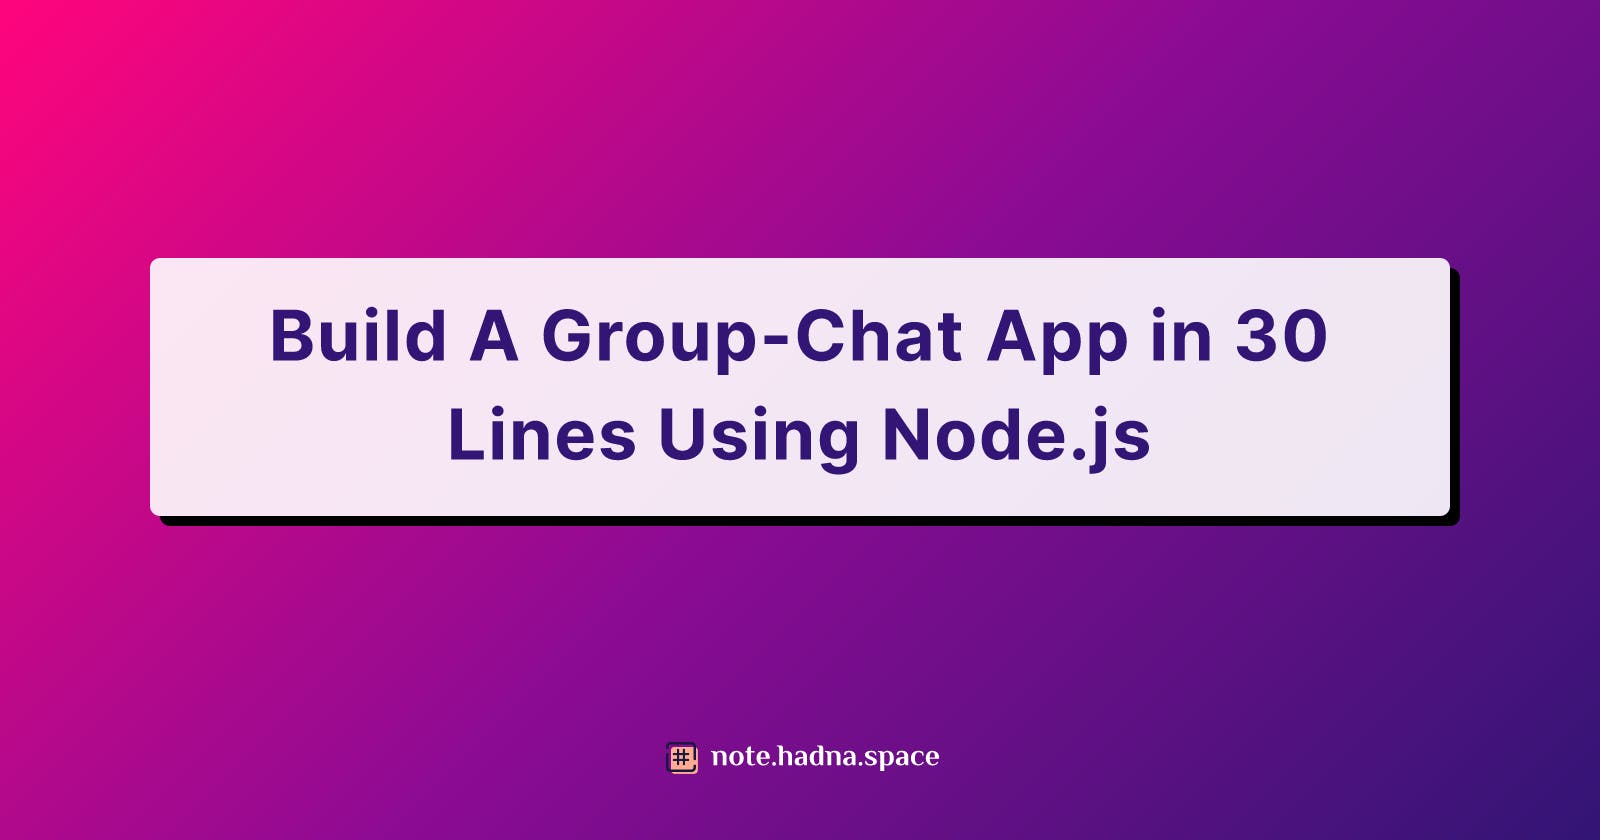 Build A Group-Chat App in 30 Lines Using Node.js